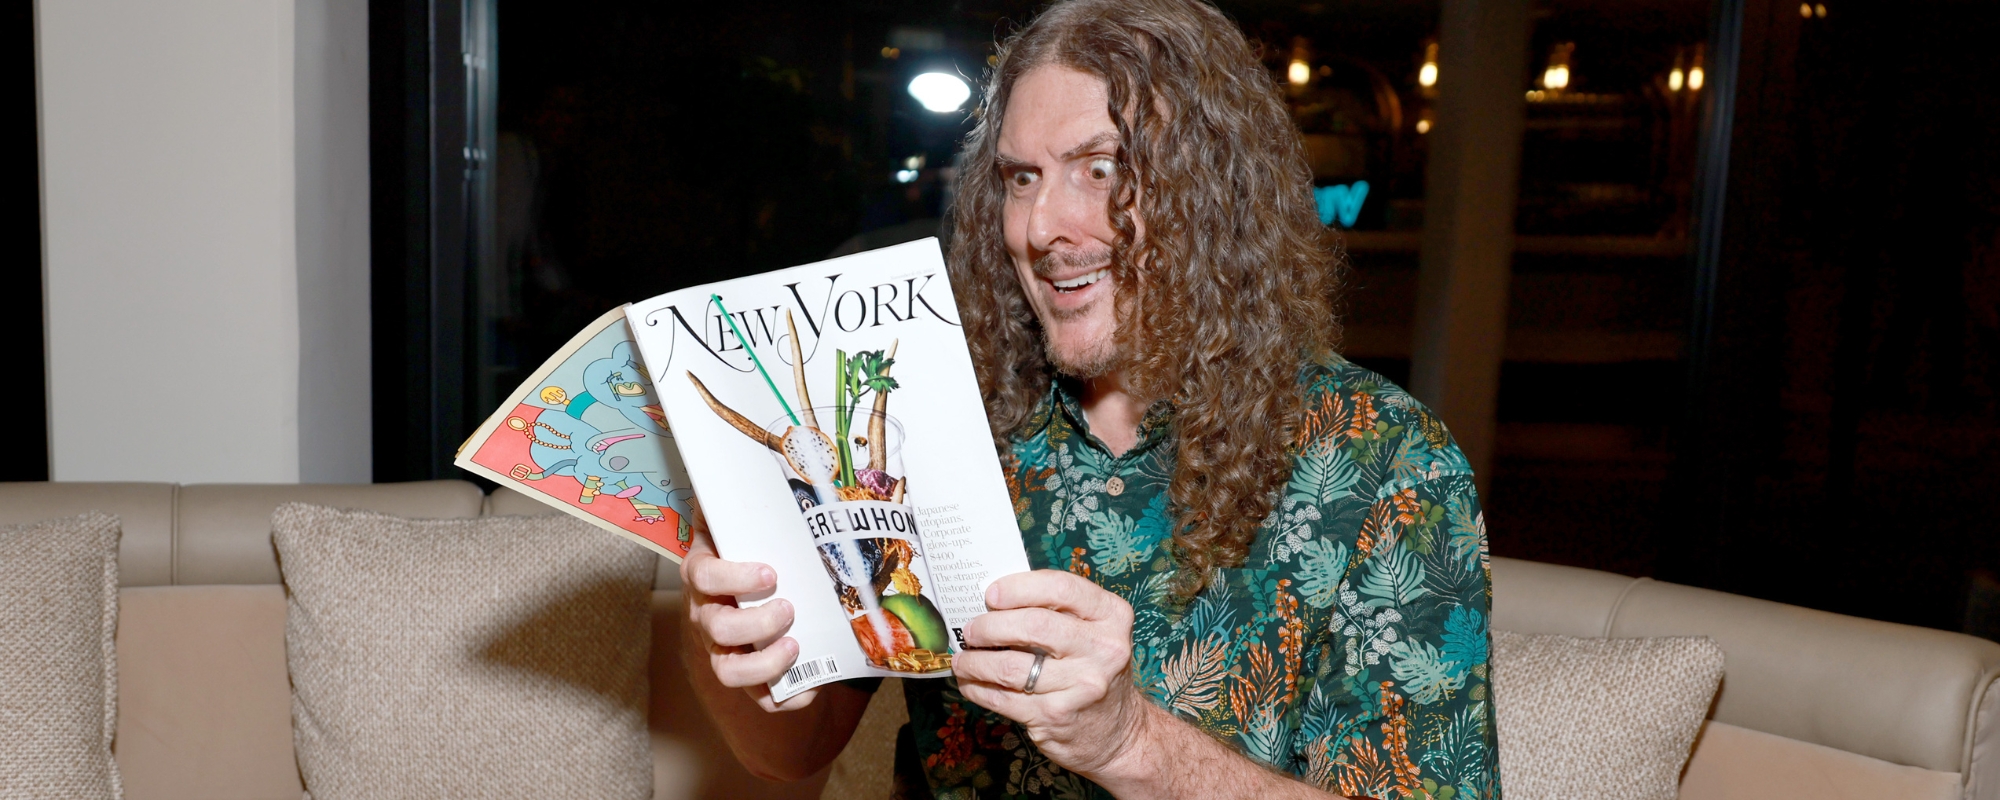 Watch “Weird Al” Yankovic Criticize Spotify Payment in His Spotify Wrapped Thank You Video to Fans